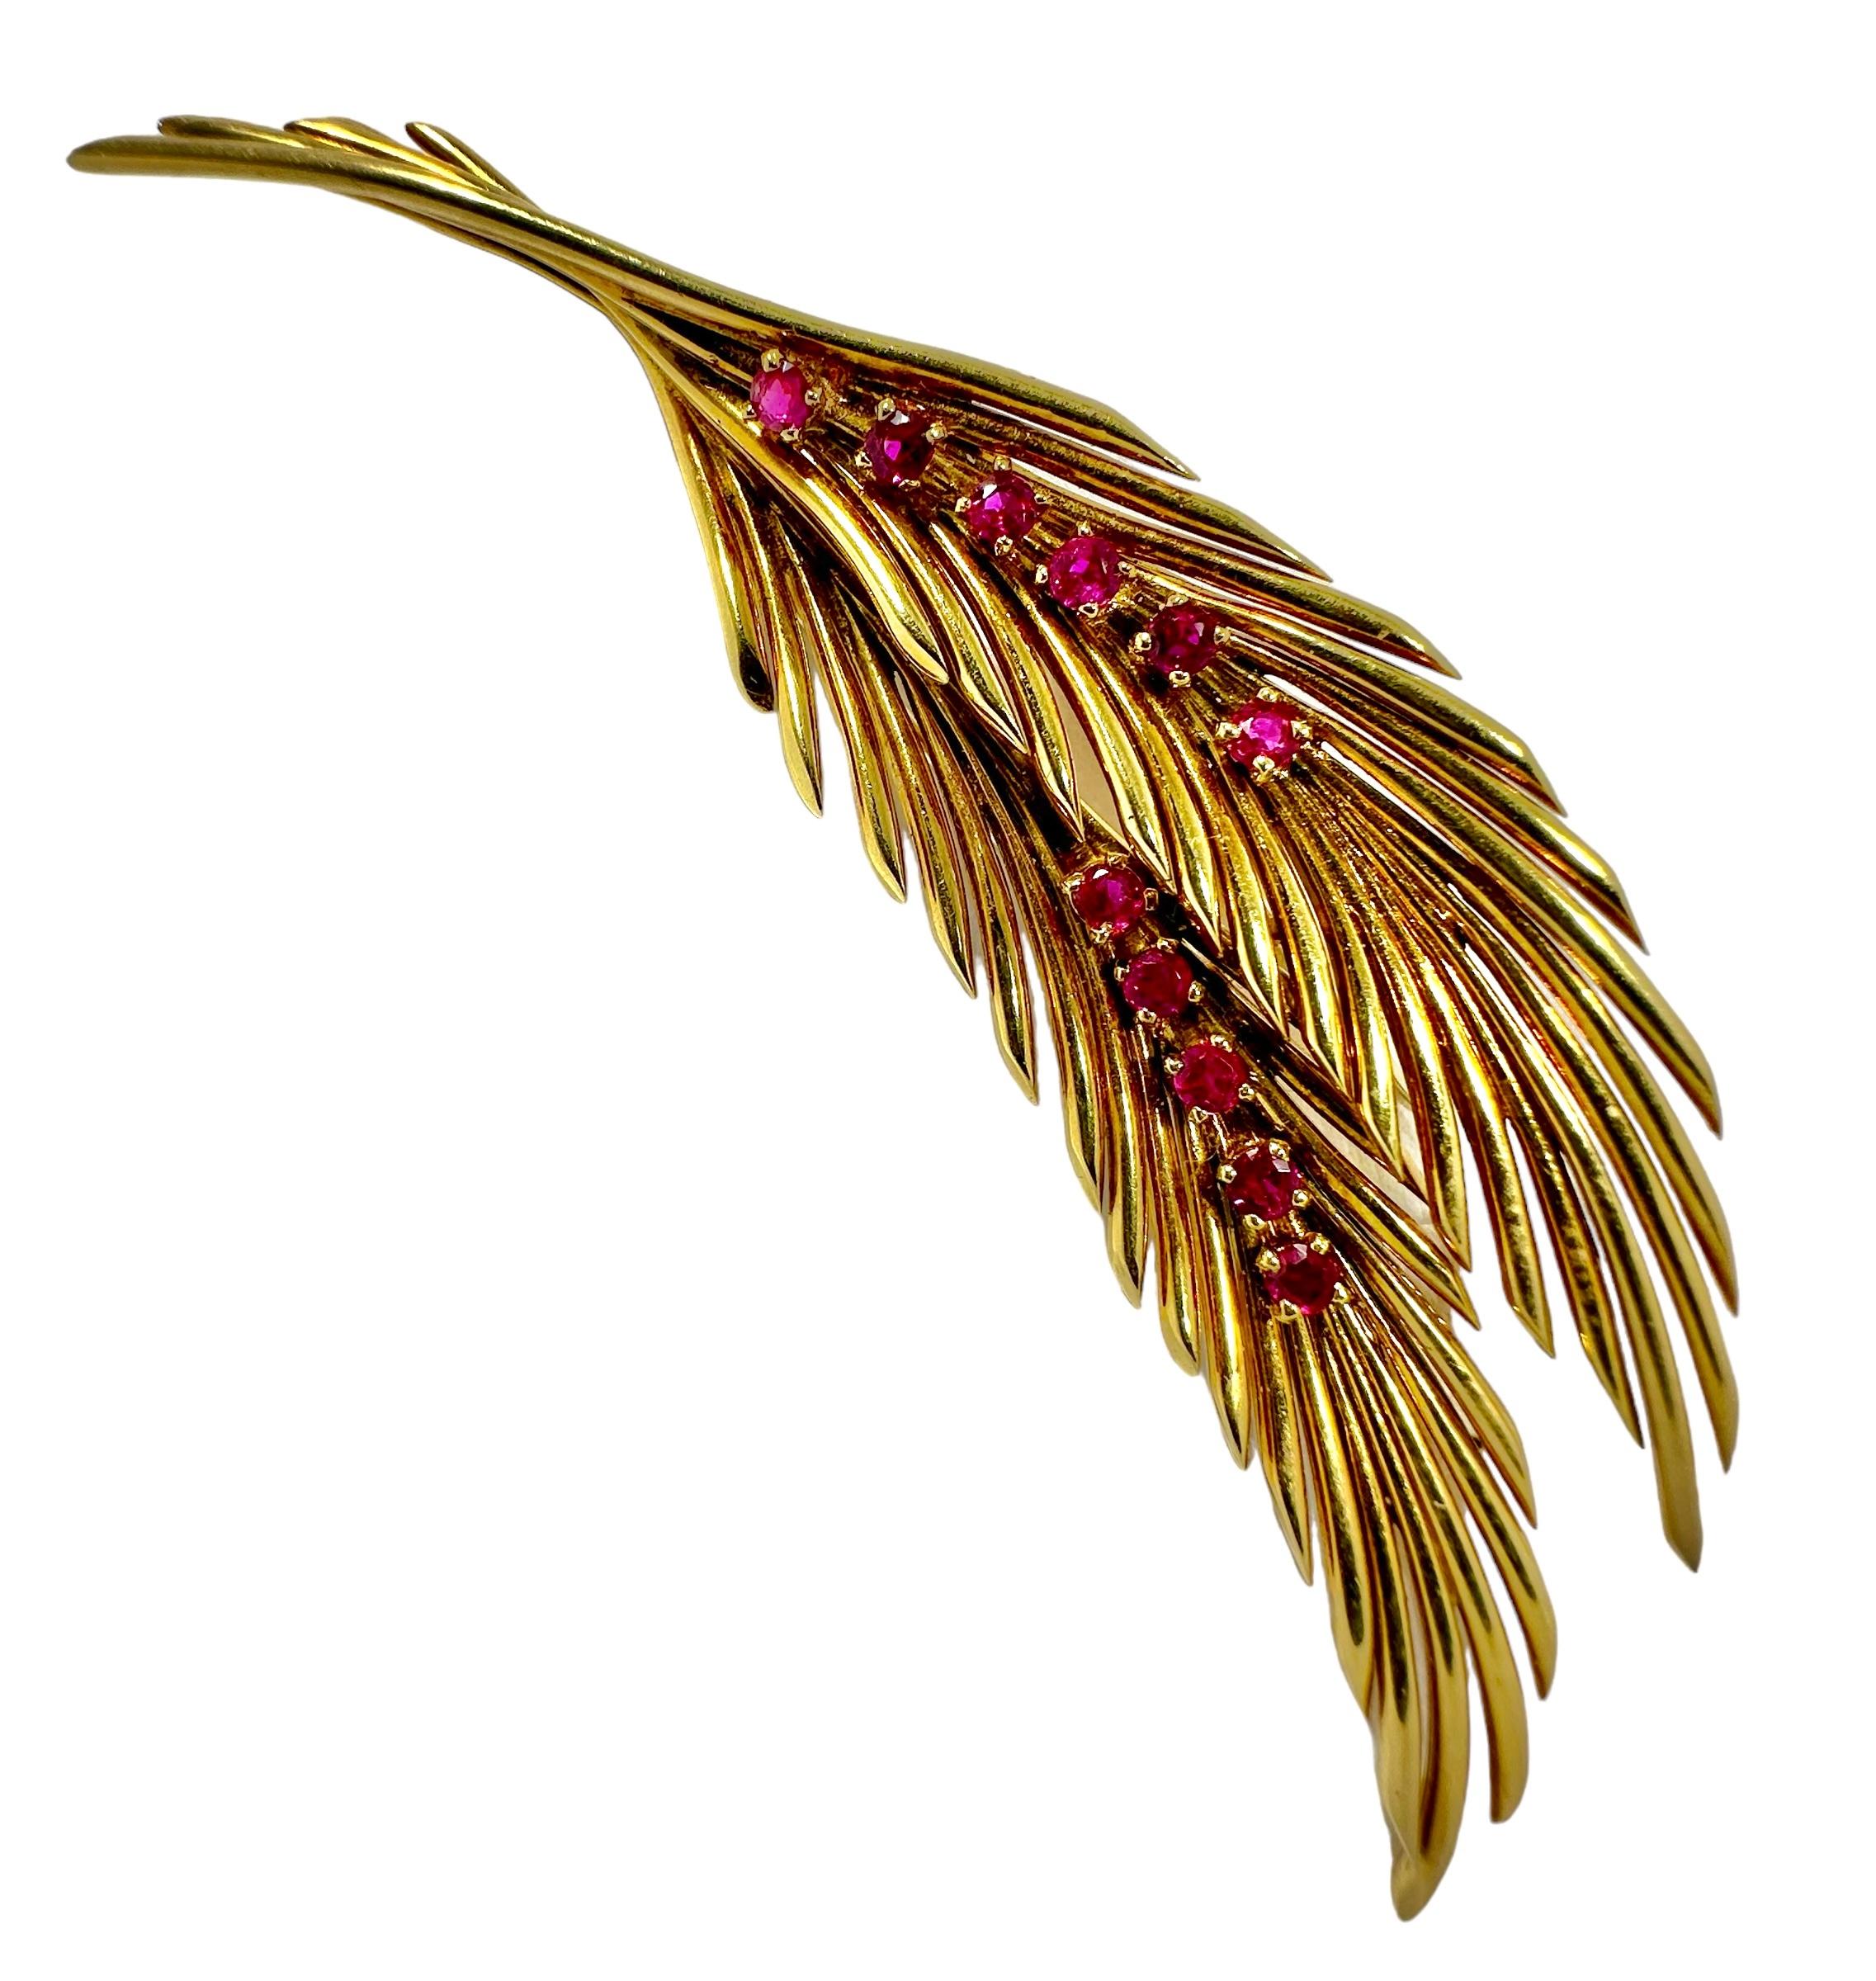 This wonderful foliate brooch, crafted by esteemed maker Van Cleef & Arpels in 1958 is a classic design. Consists of one leaf gently resting on top of another leaf, set with 6 round faceted Burmese Rubies in a line down the center of the leaf on